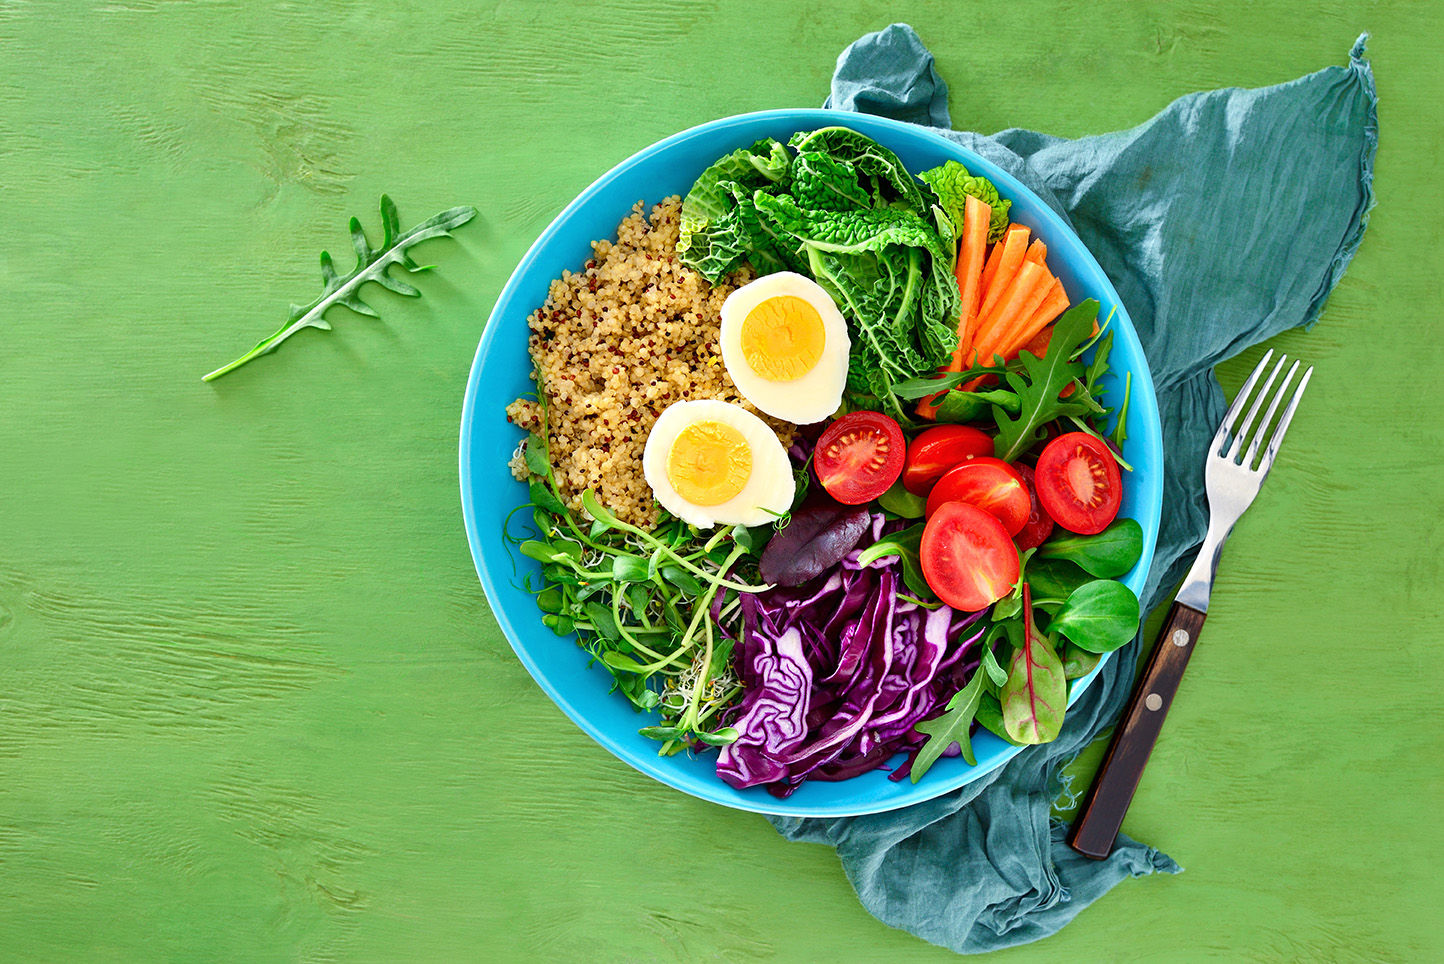 photo with Fresh juicy and crusty buddha bowl healthy meal with quinoa and